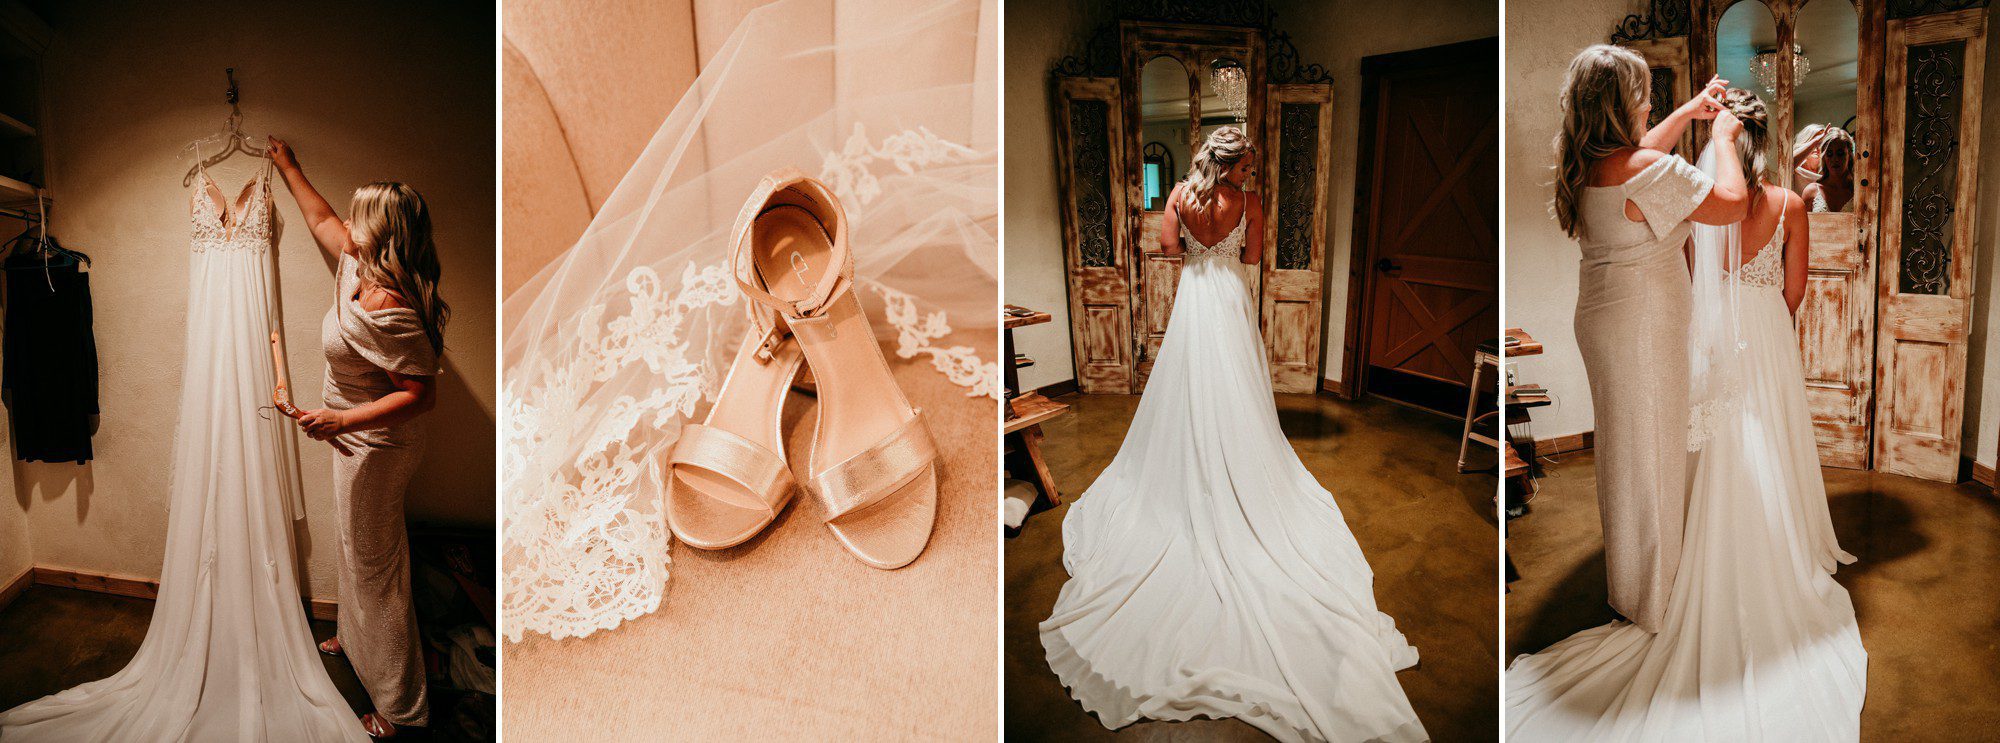 Bride getting ready in the bridal suite with dress and shoe details